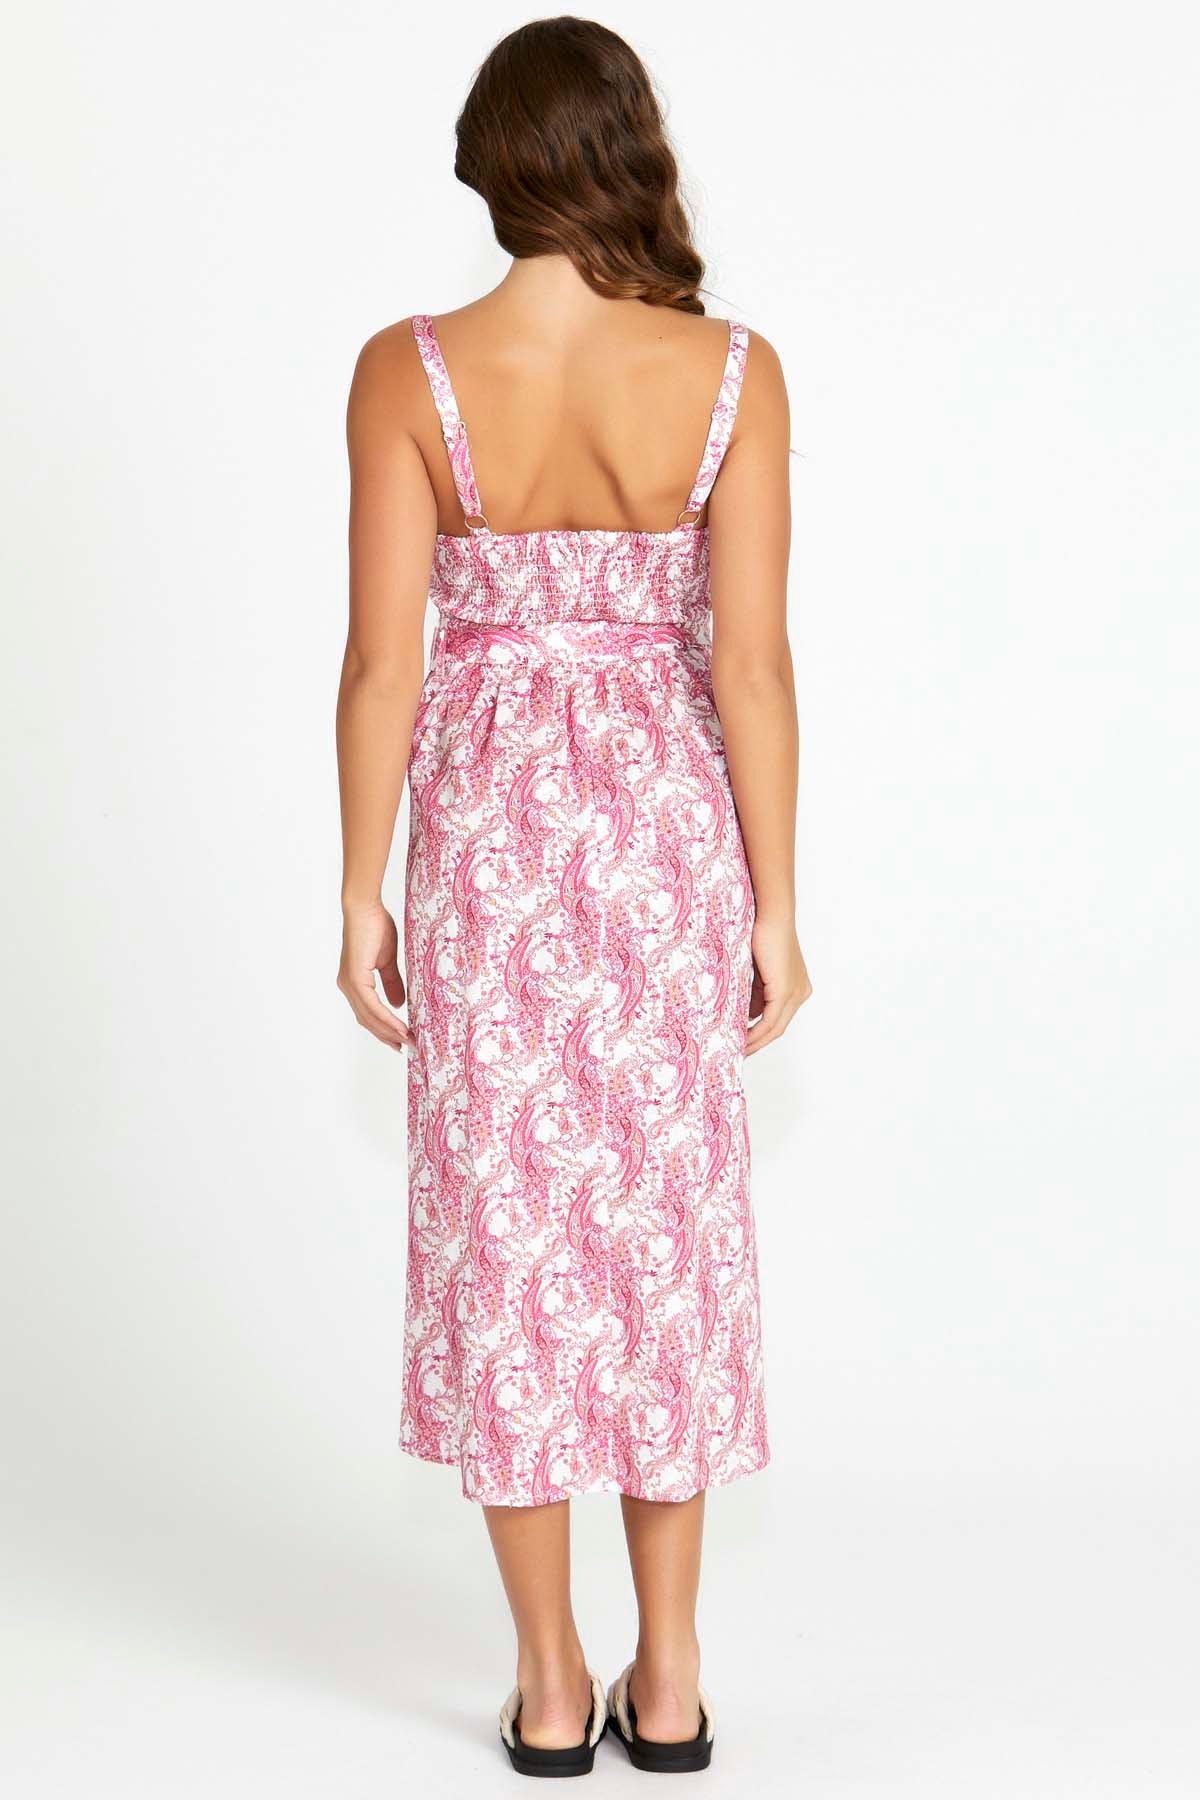 Sass Jemima Belted Midi Dress in Pink Paisley